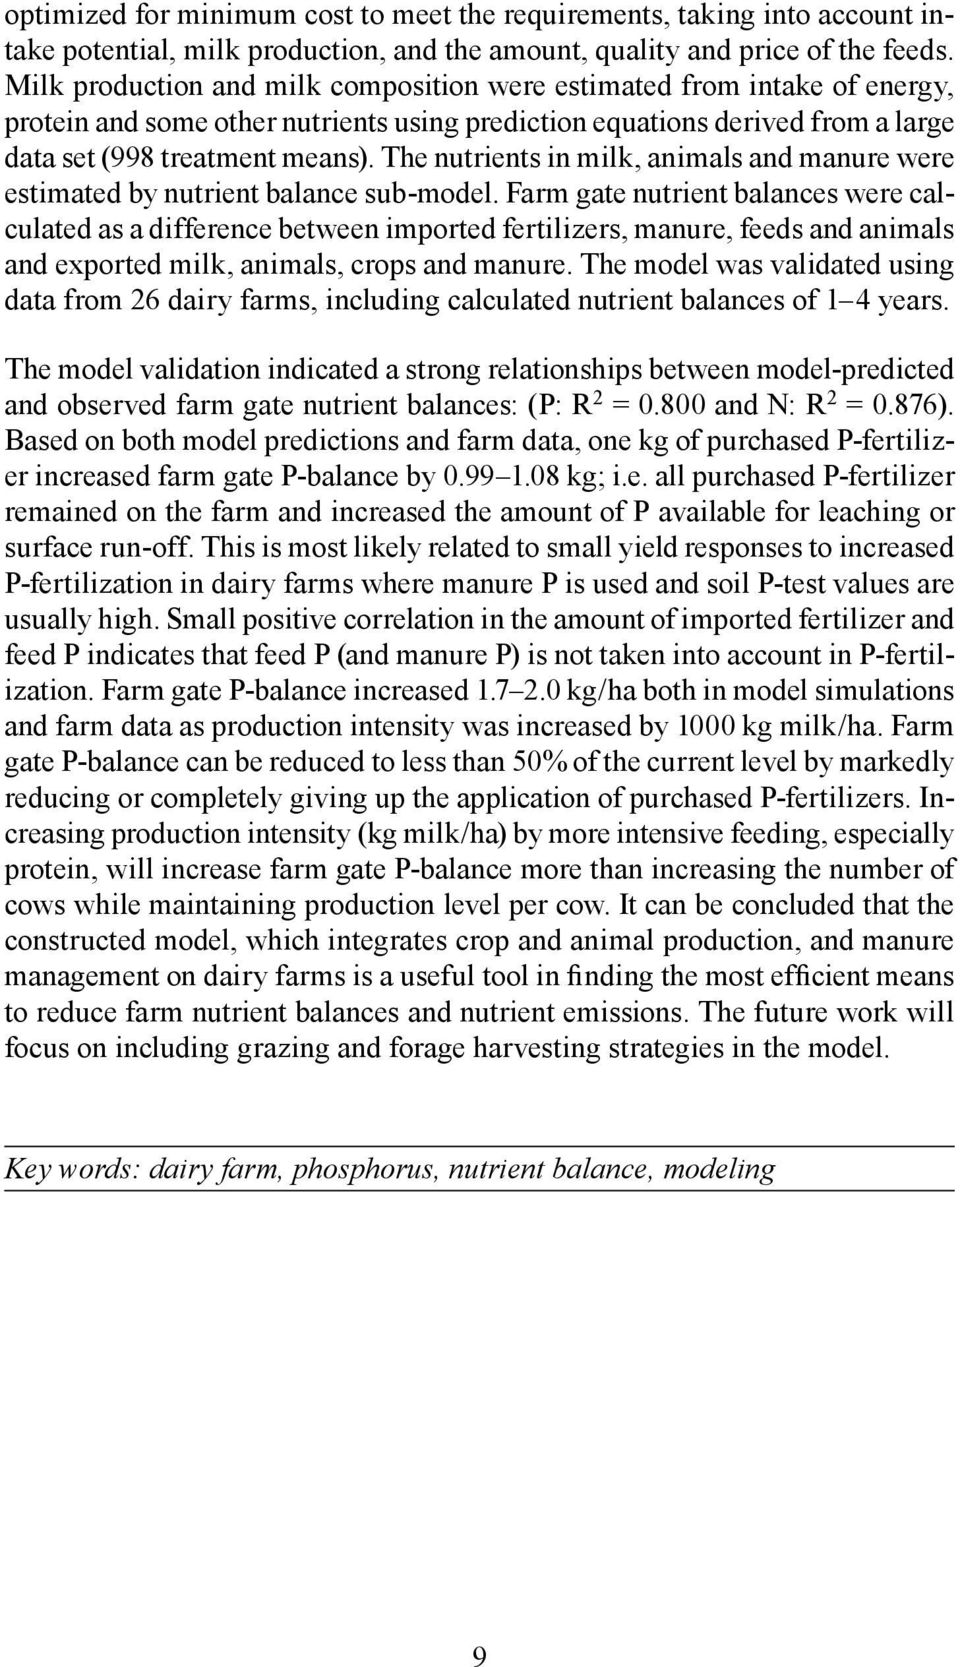 The nutrients in milk, animals and manure were estimated by nutrient balance sub-model.